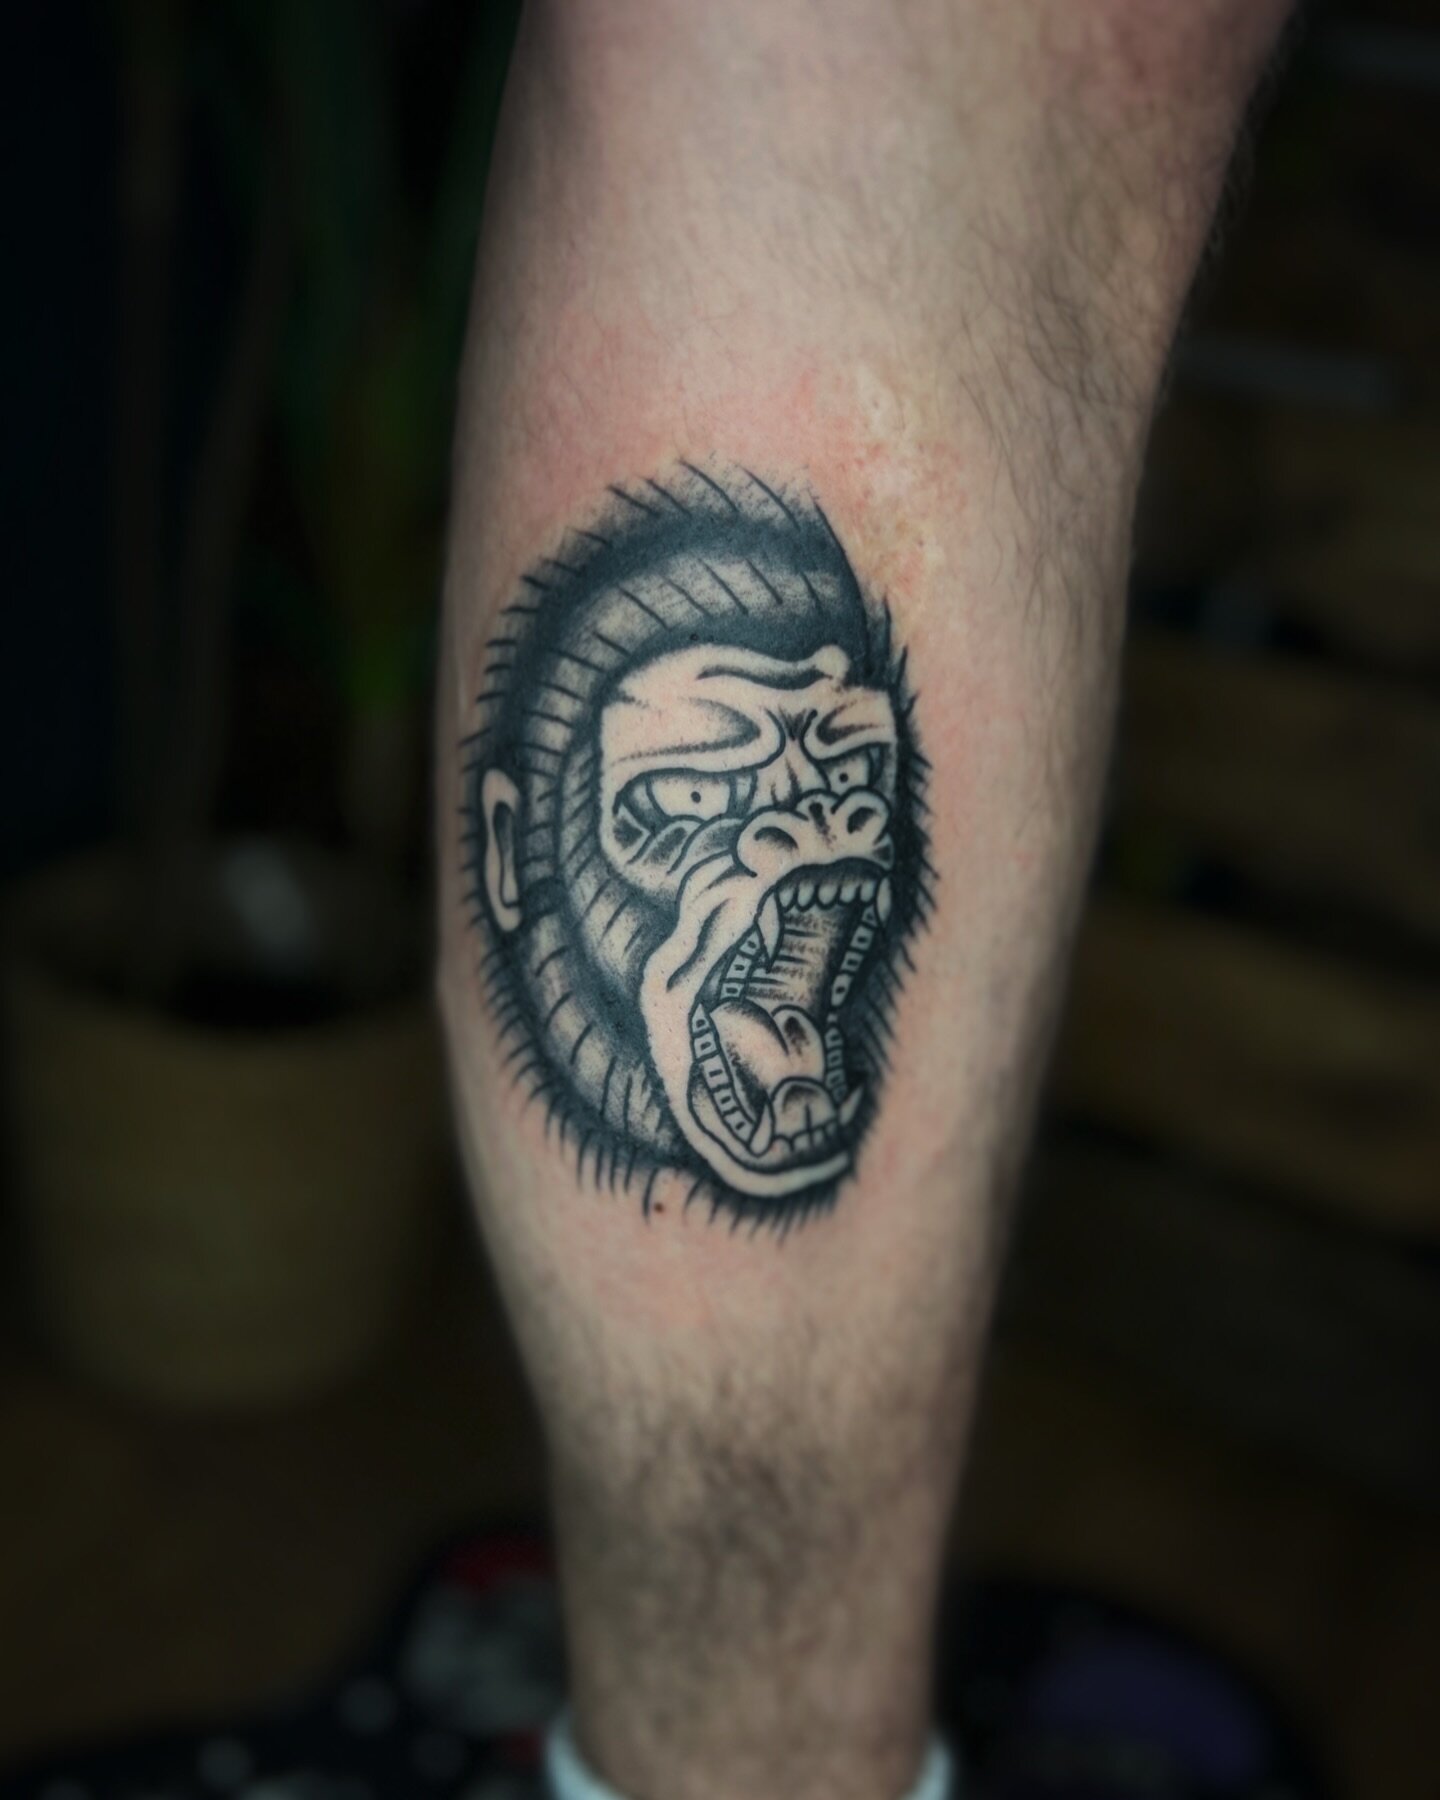 Traditional 🦍 Gorilla from the other day. 
-
-
-
-
-
-
-
-
-
-
-
#gorilla #gorillatattoo #traditionaltattoos #traditionaltattoo #traditionaltattooartist #oldschooltattoos #oldlines #boldwillhold #staffordshire #stokeontrent #newcastleunderlyme #keel